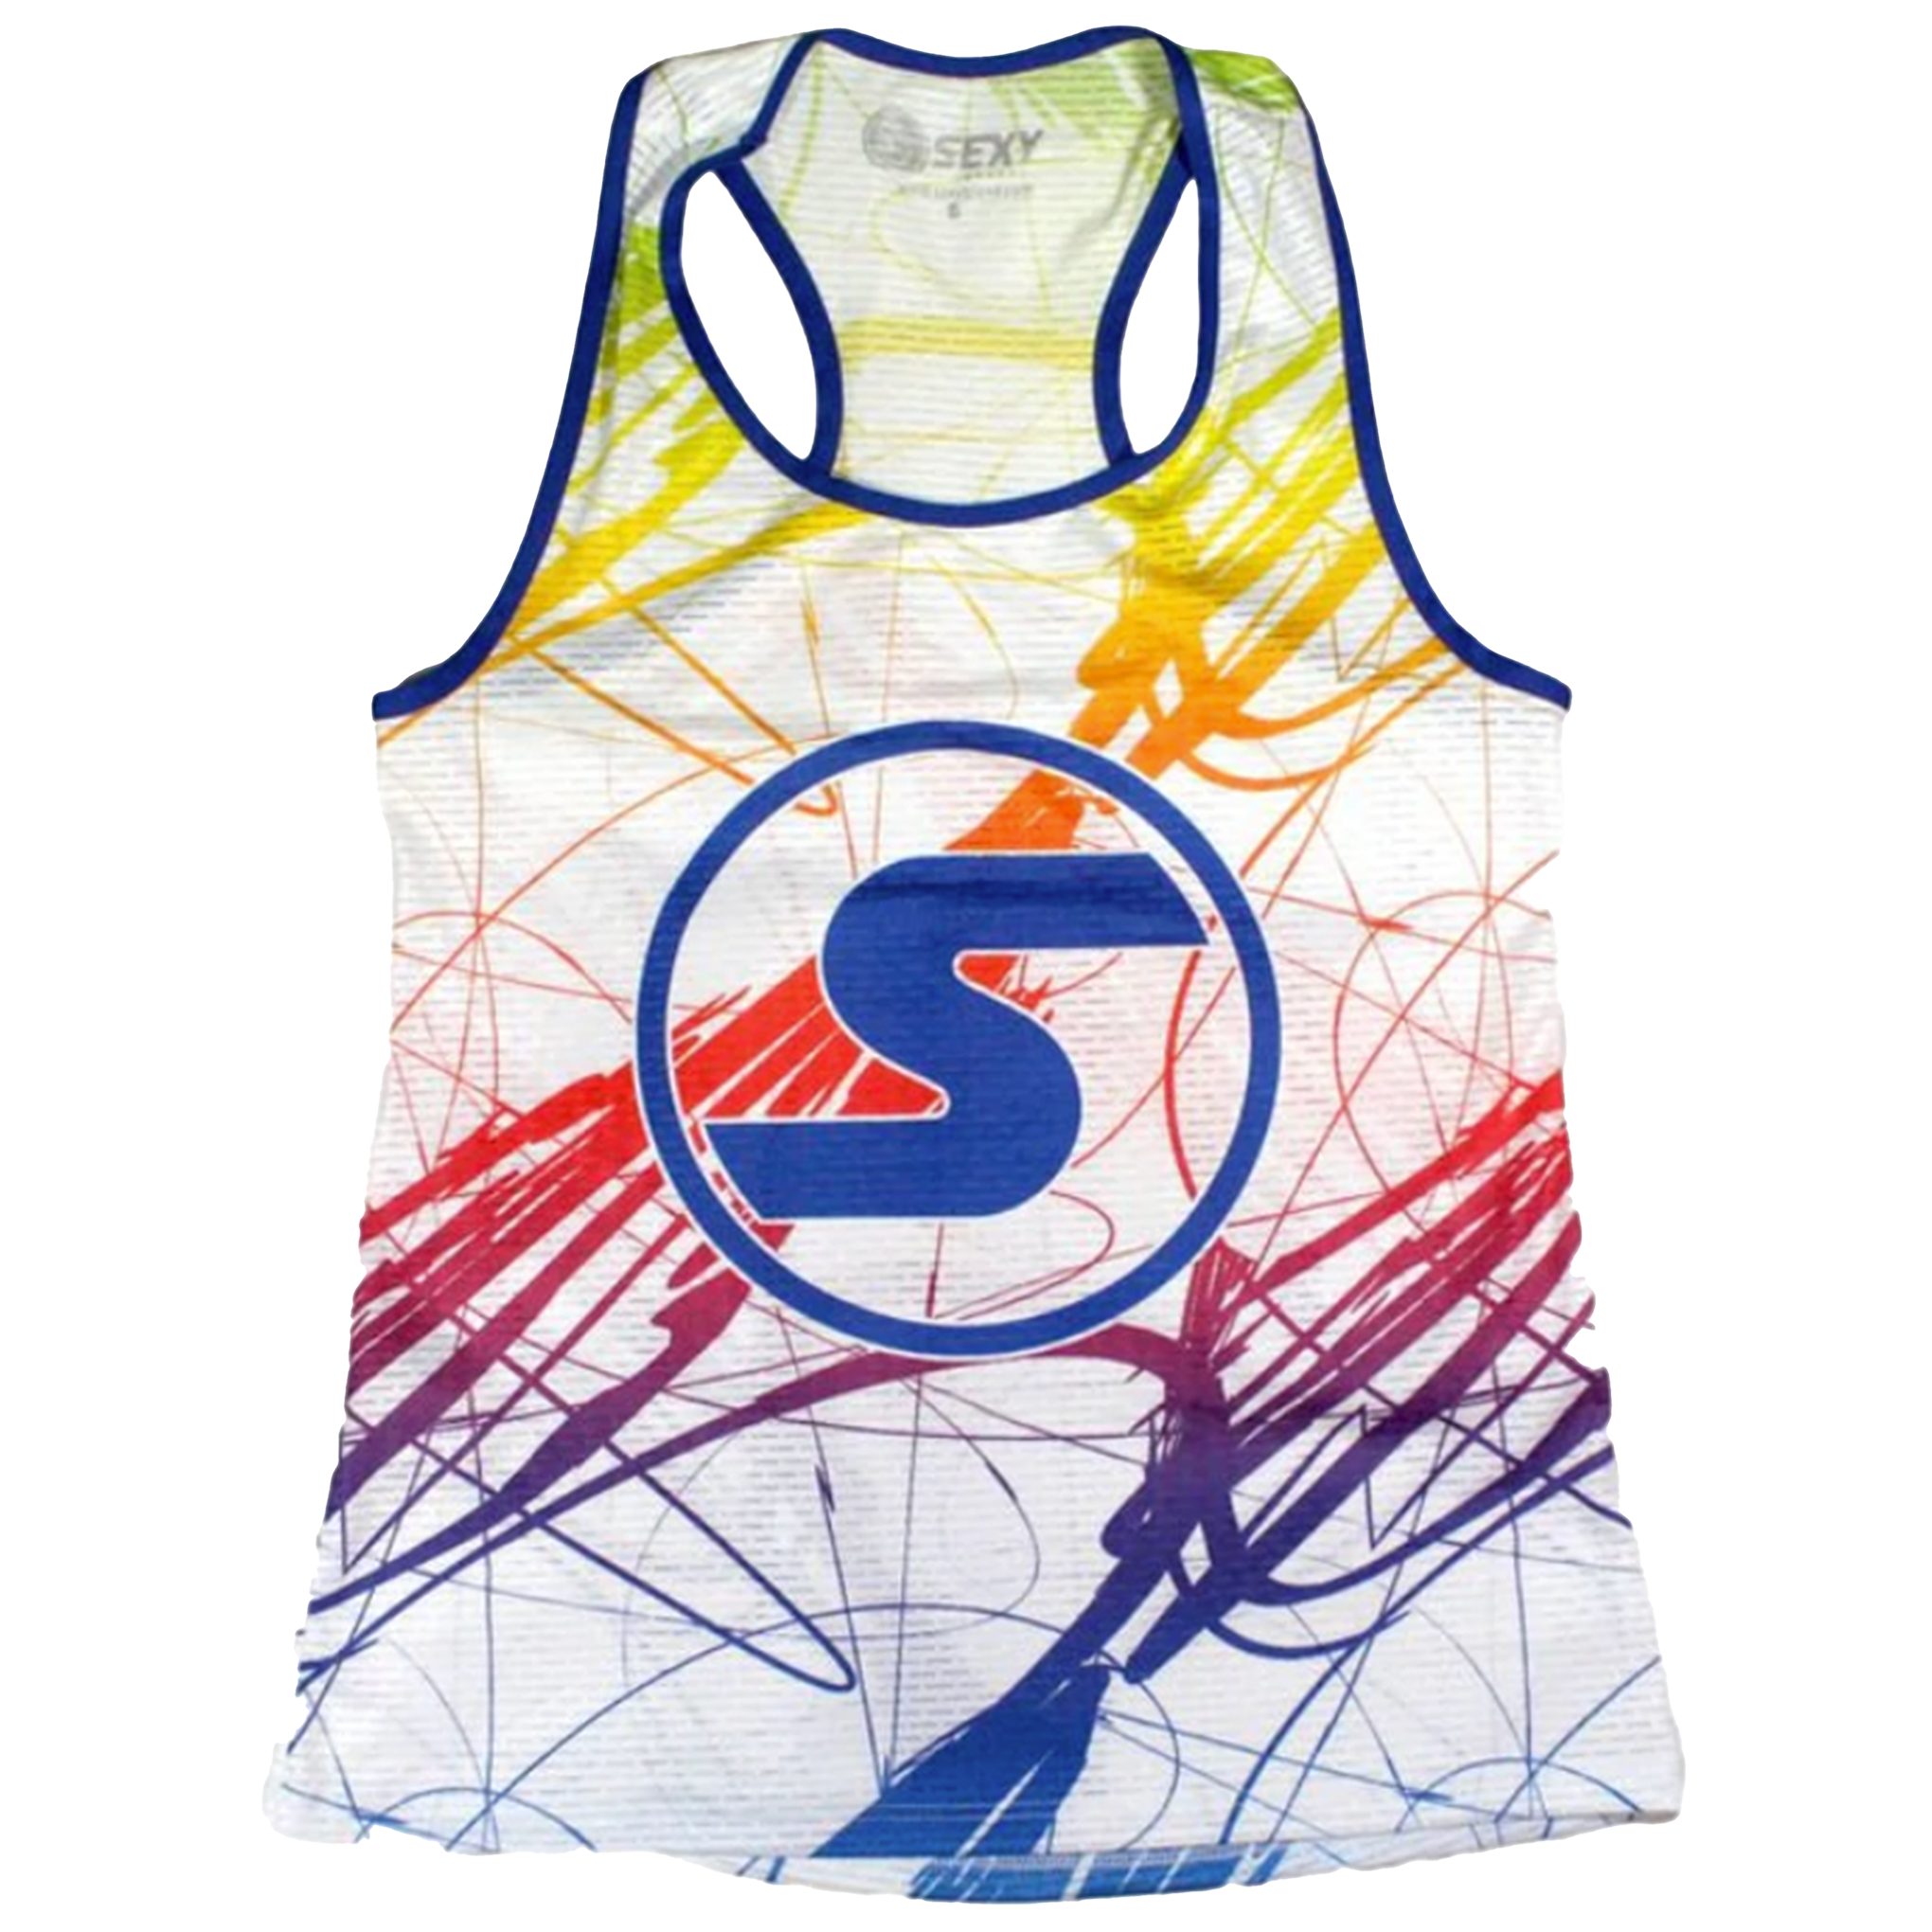 SEXY BRAND Women's SXY NKD Competition Tank in White